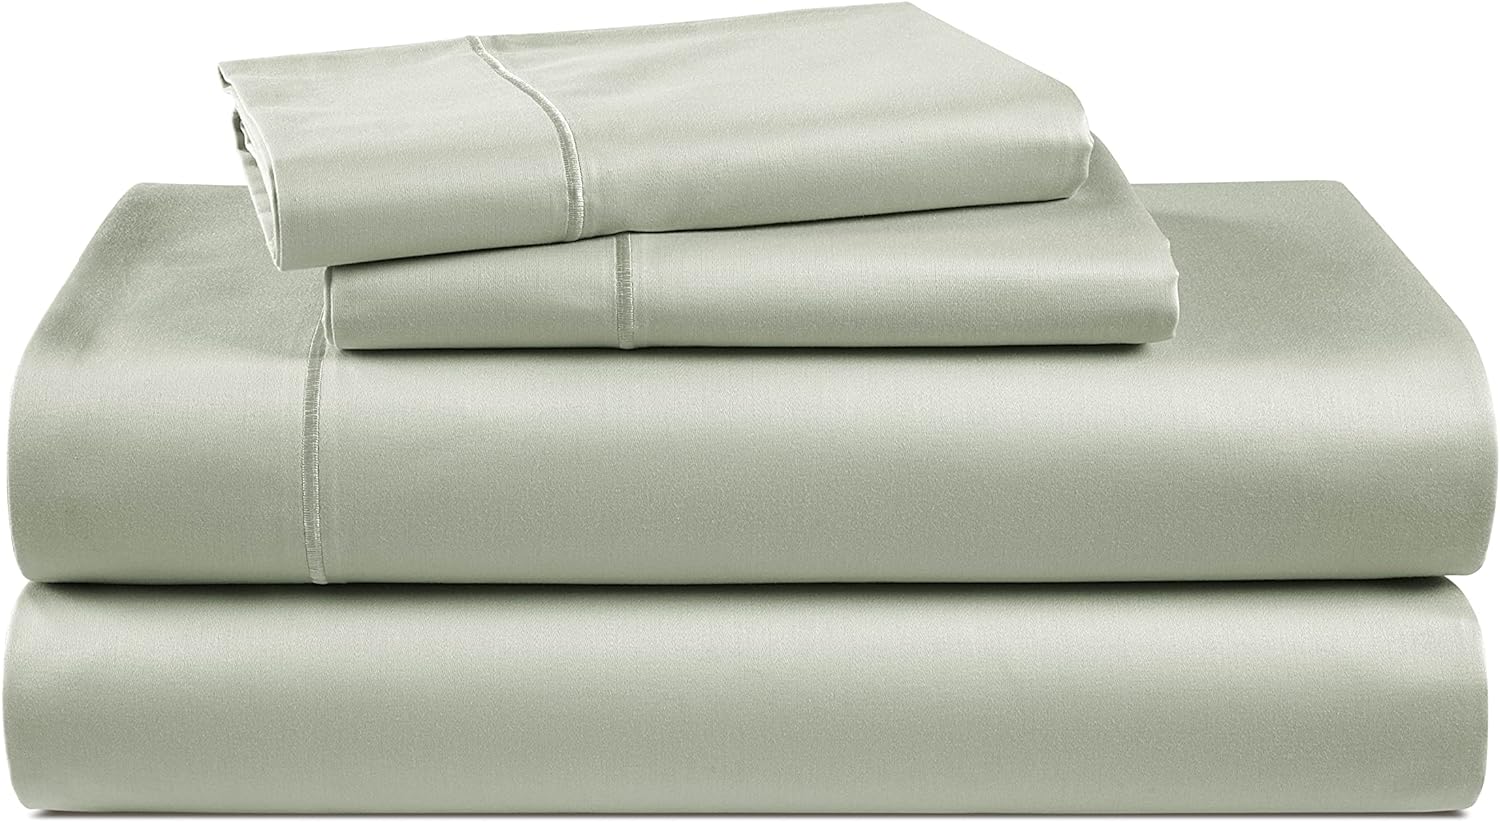 LANE LINEN Luxury 100% Egyptian Cotton Bed Sheets - 1000 Thread Count 4-Piece Mineral King Set Bedding Sateen Weave 16 Deep Pocket (Fits Upto 17 Mattress)